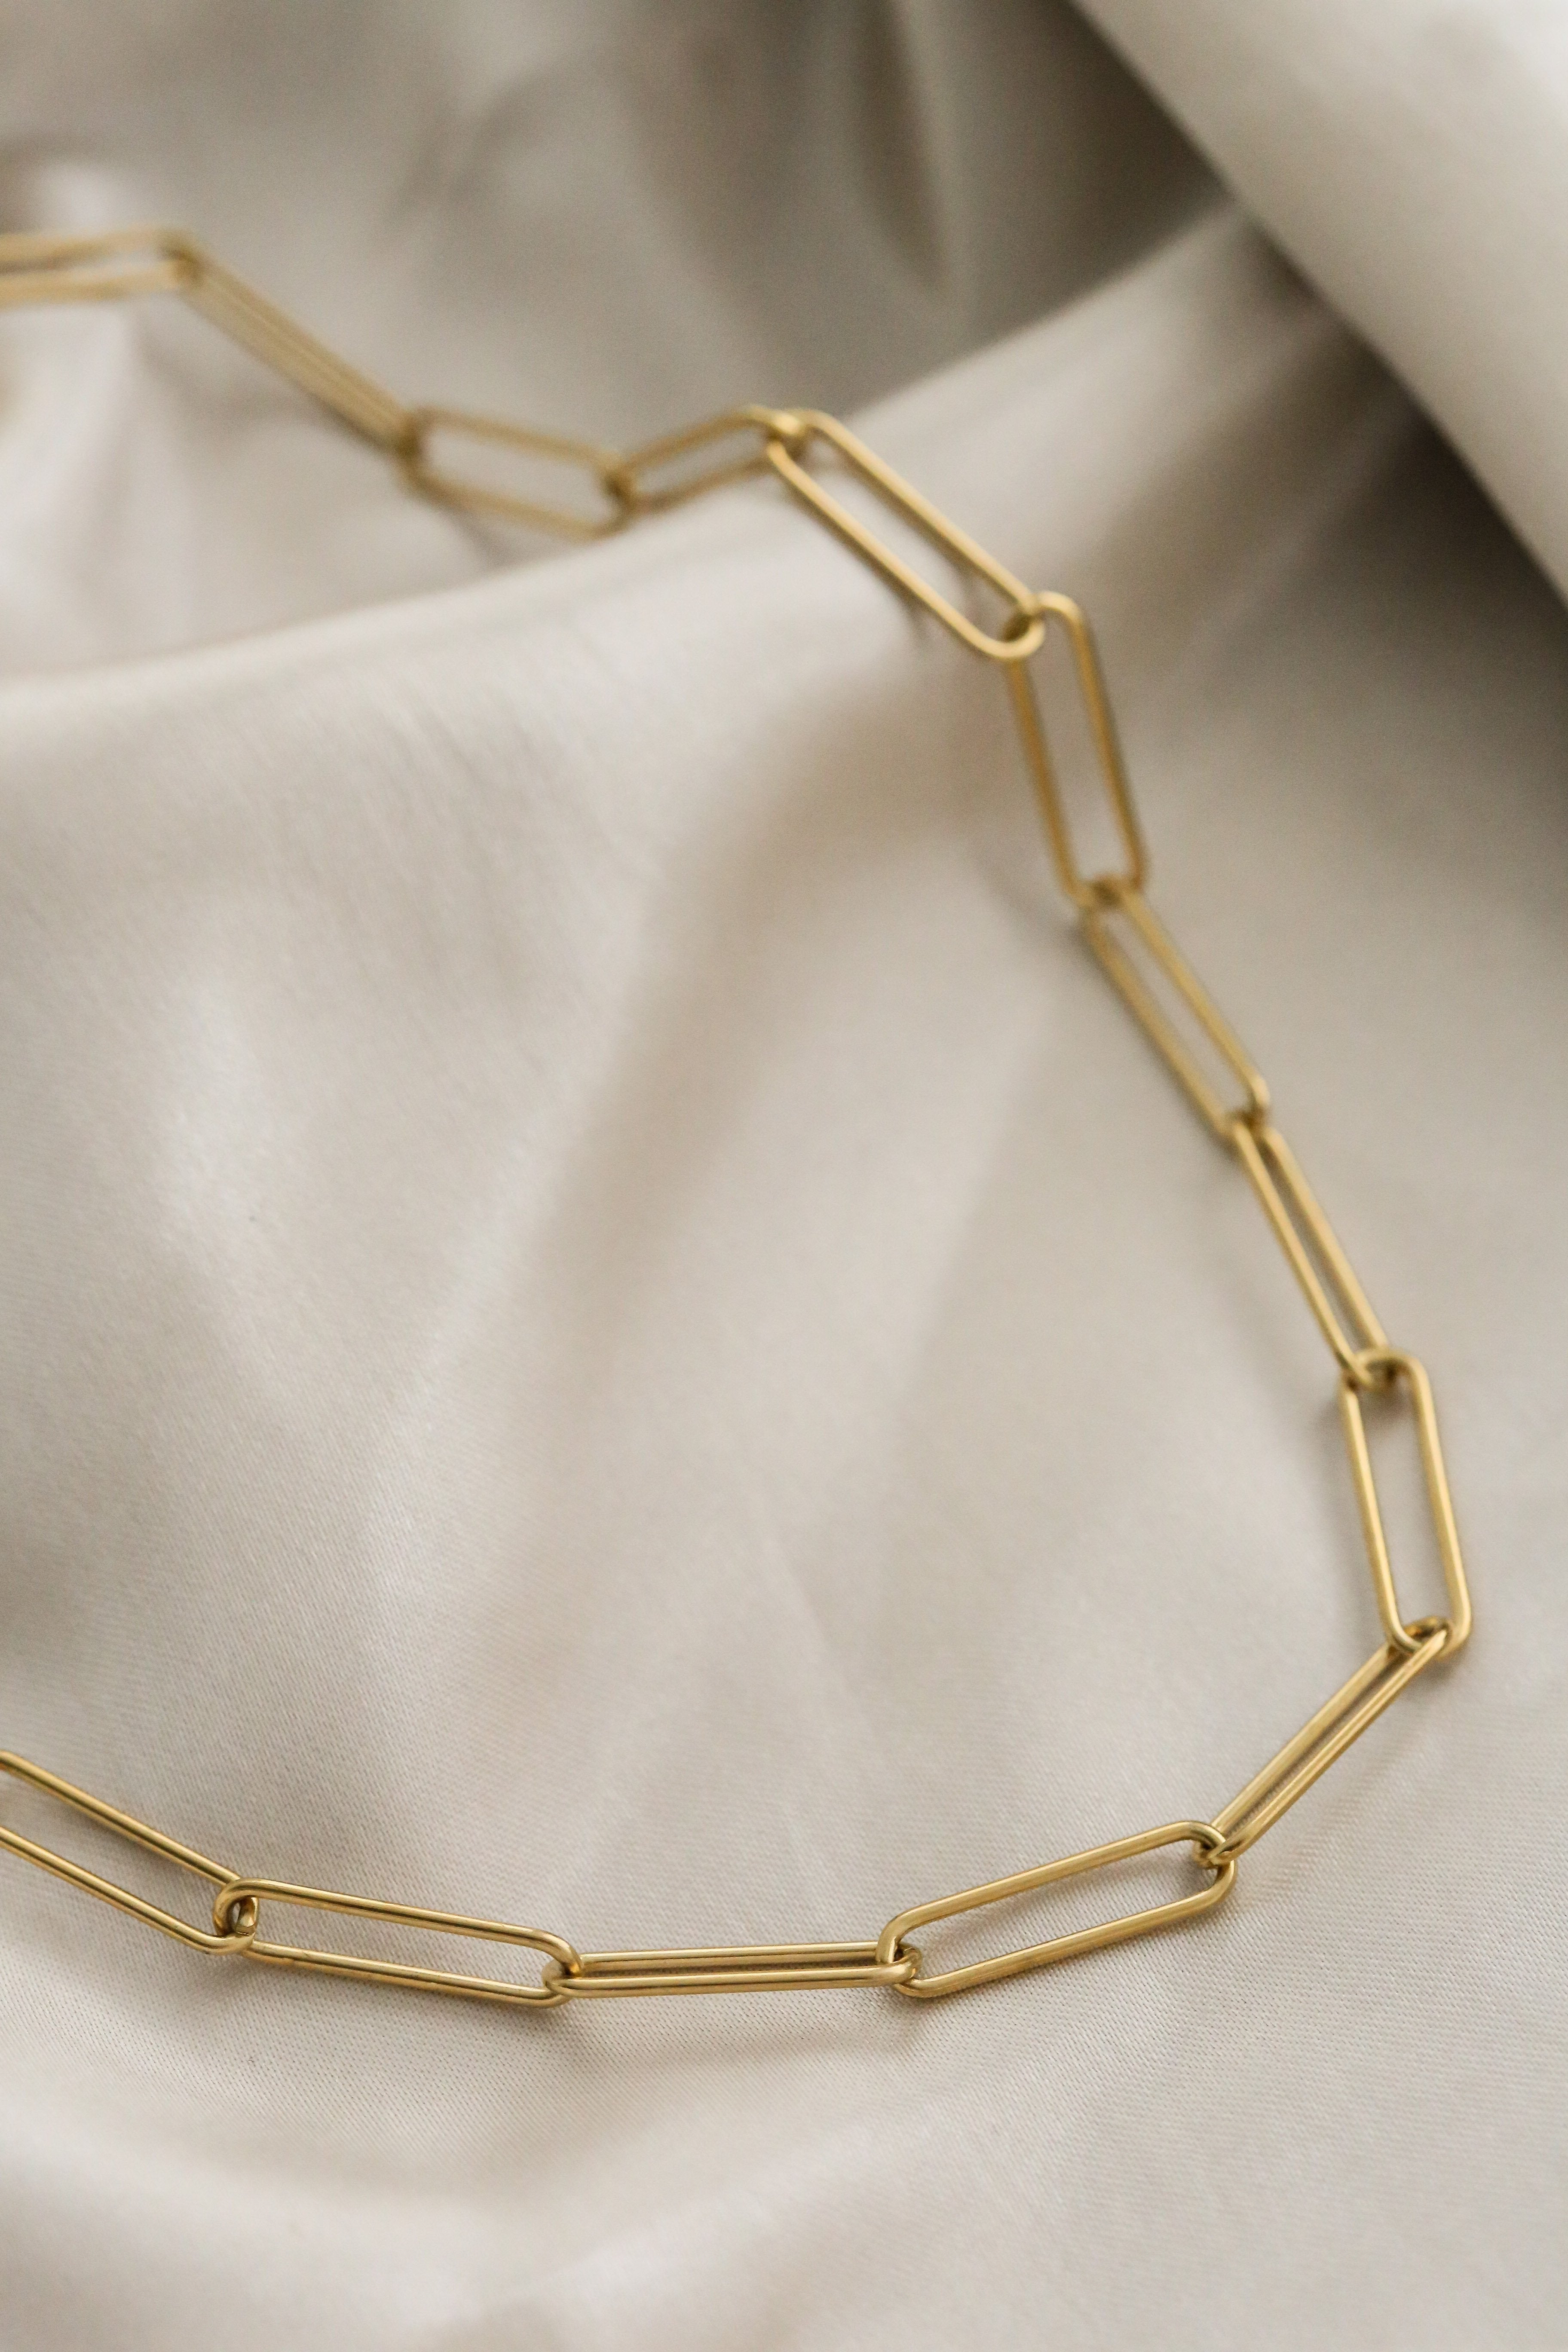 Lucius necklace - Boutique Minimaliste has waterproof, durable, elegant and vintage inspired jewelry